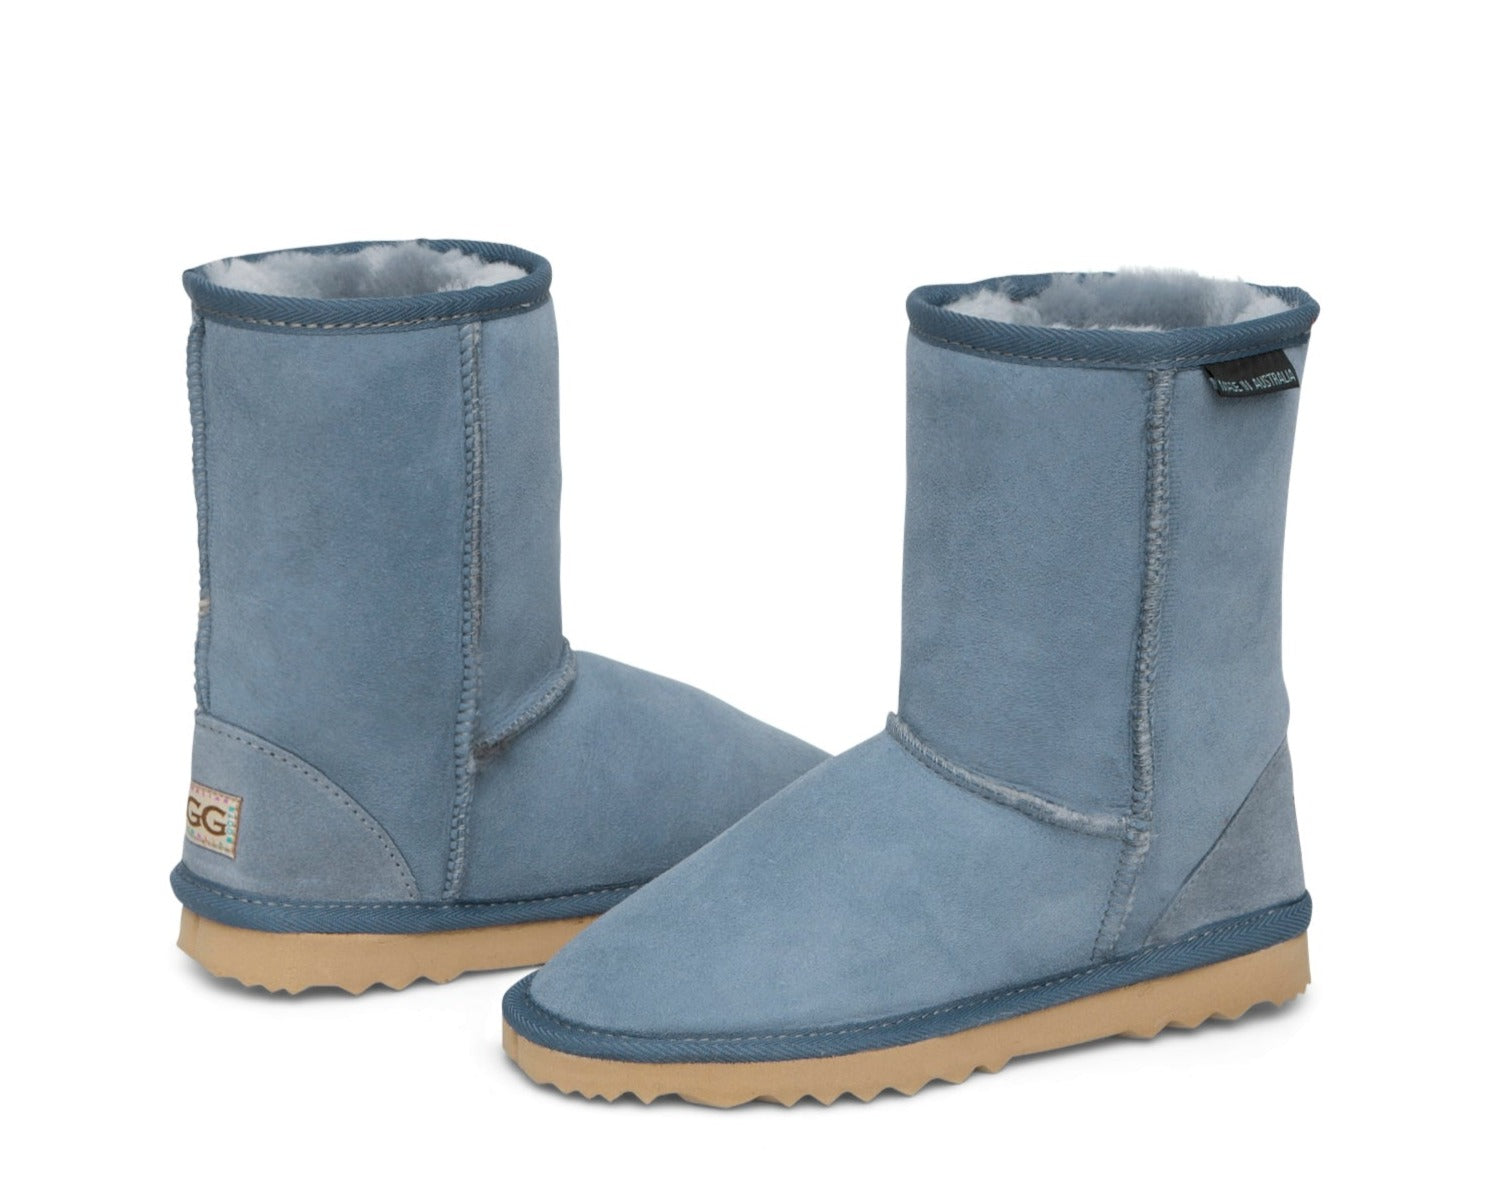 Kid's Classic Ugg Boots in Denim Blue